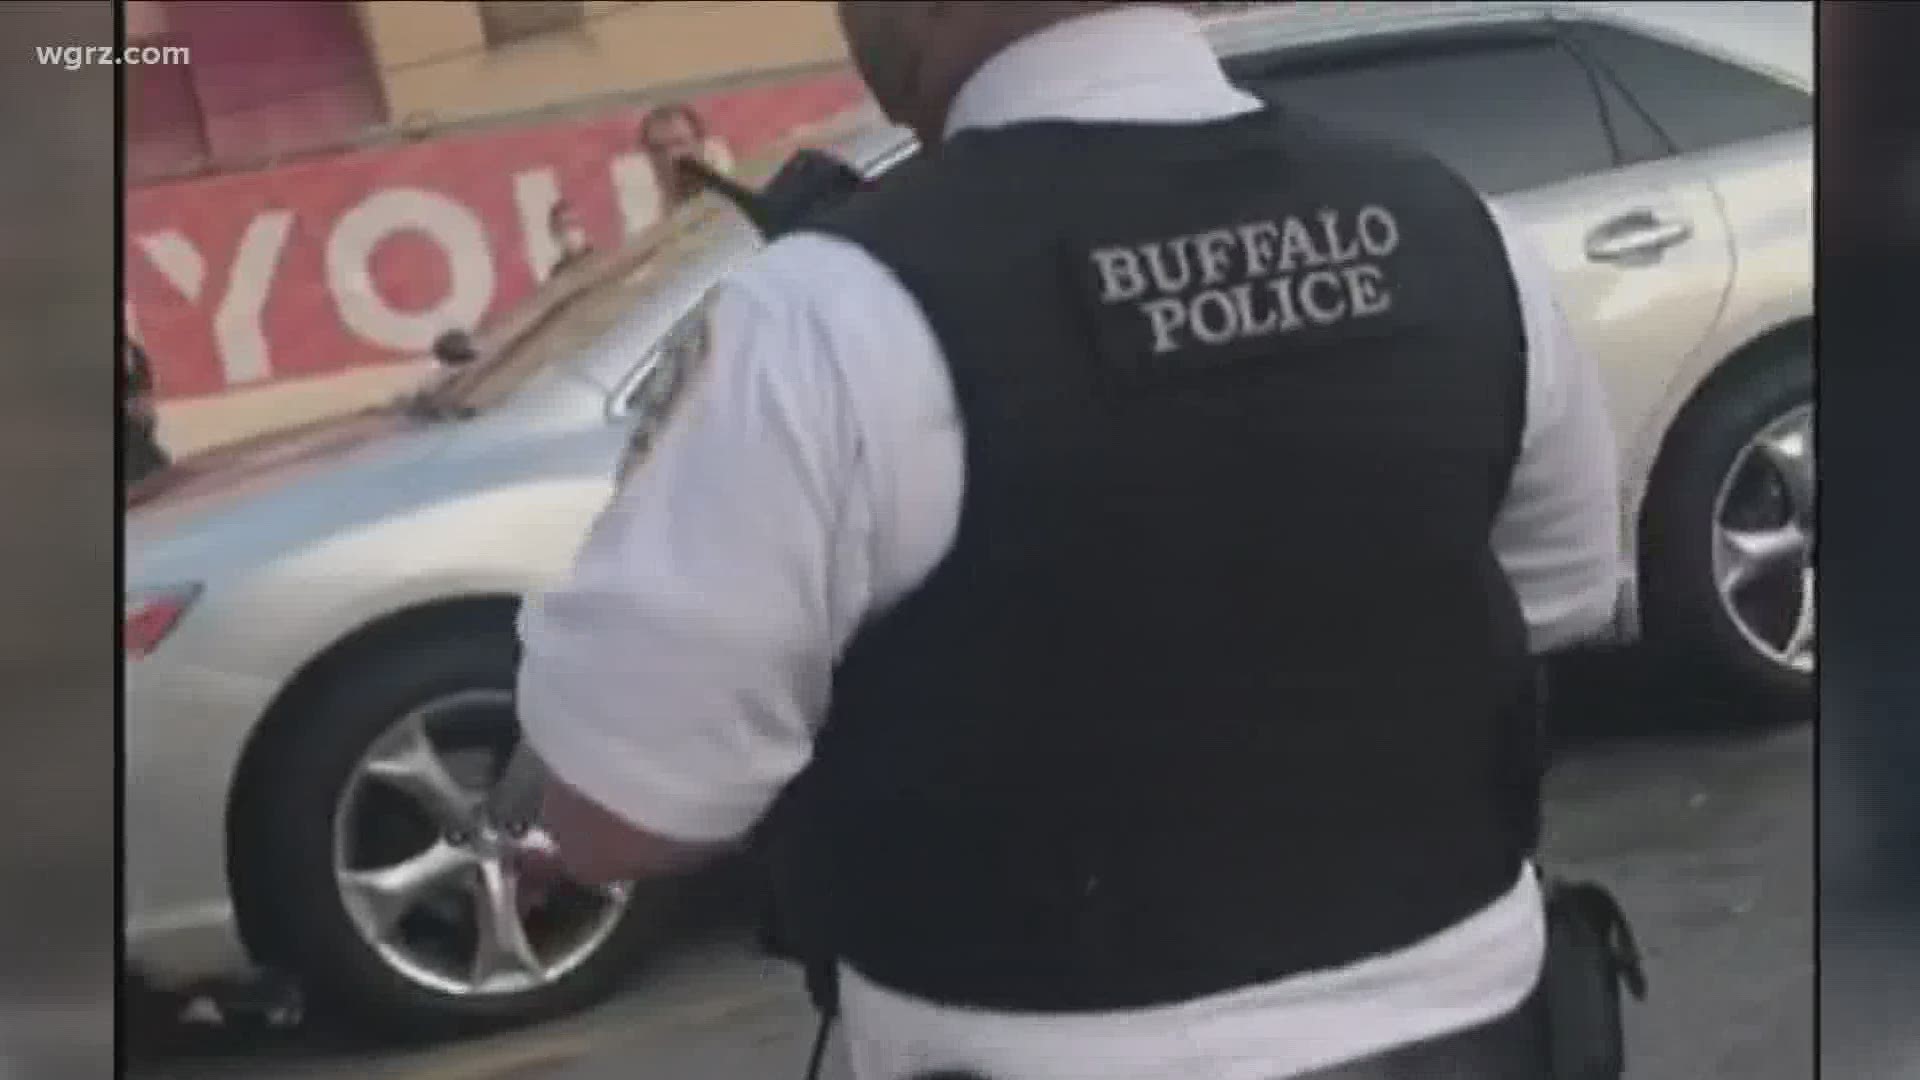 A Buffalo Police officer is suspended because of that video showing him verbally harassing a woman outside a 7-eleven store near D'youville college.